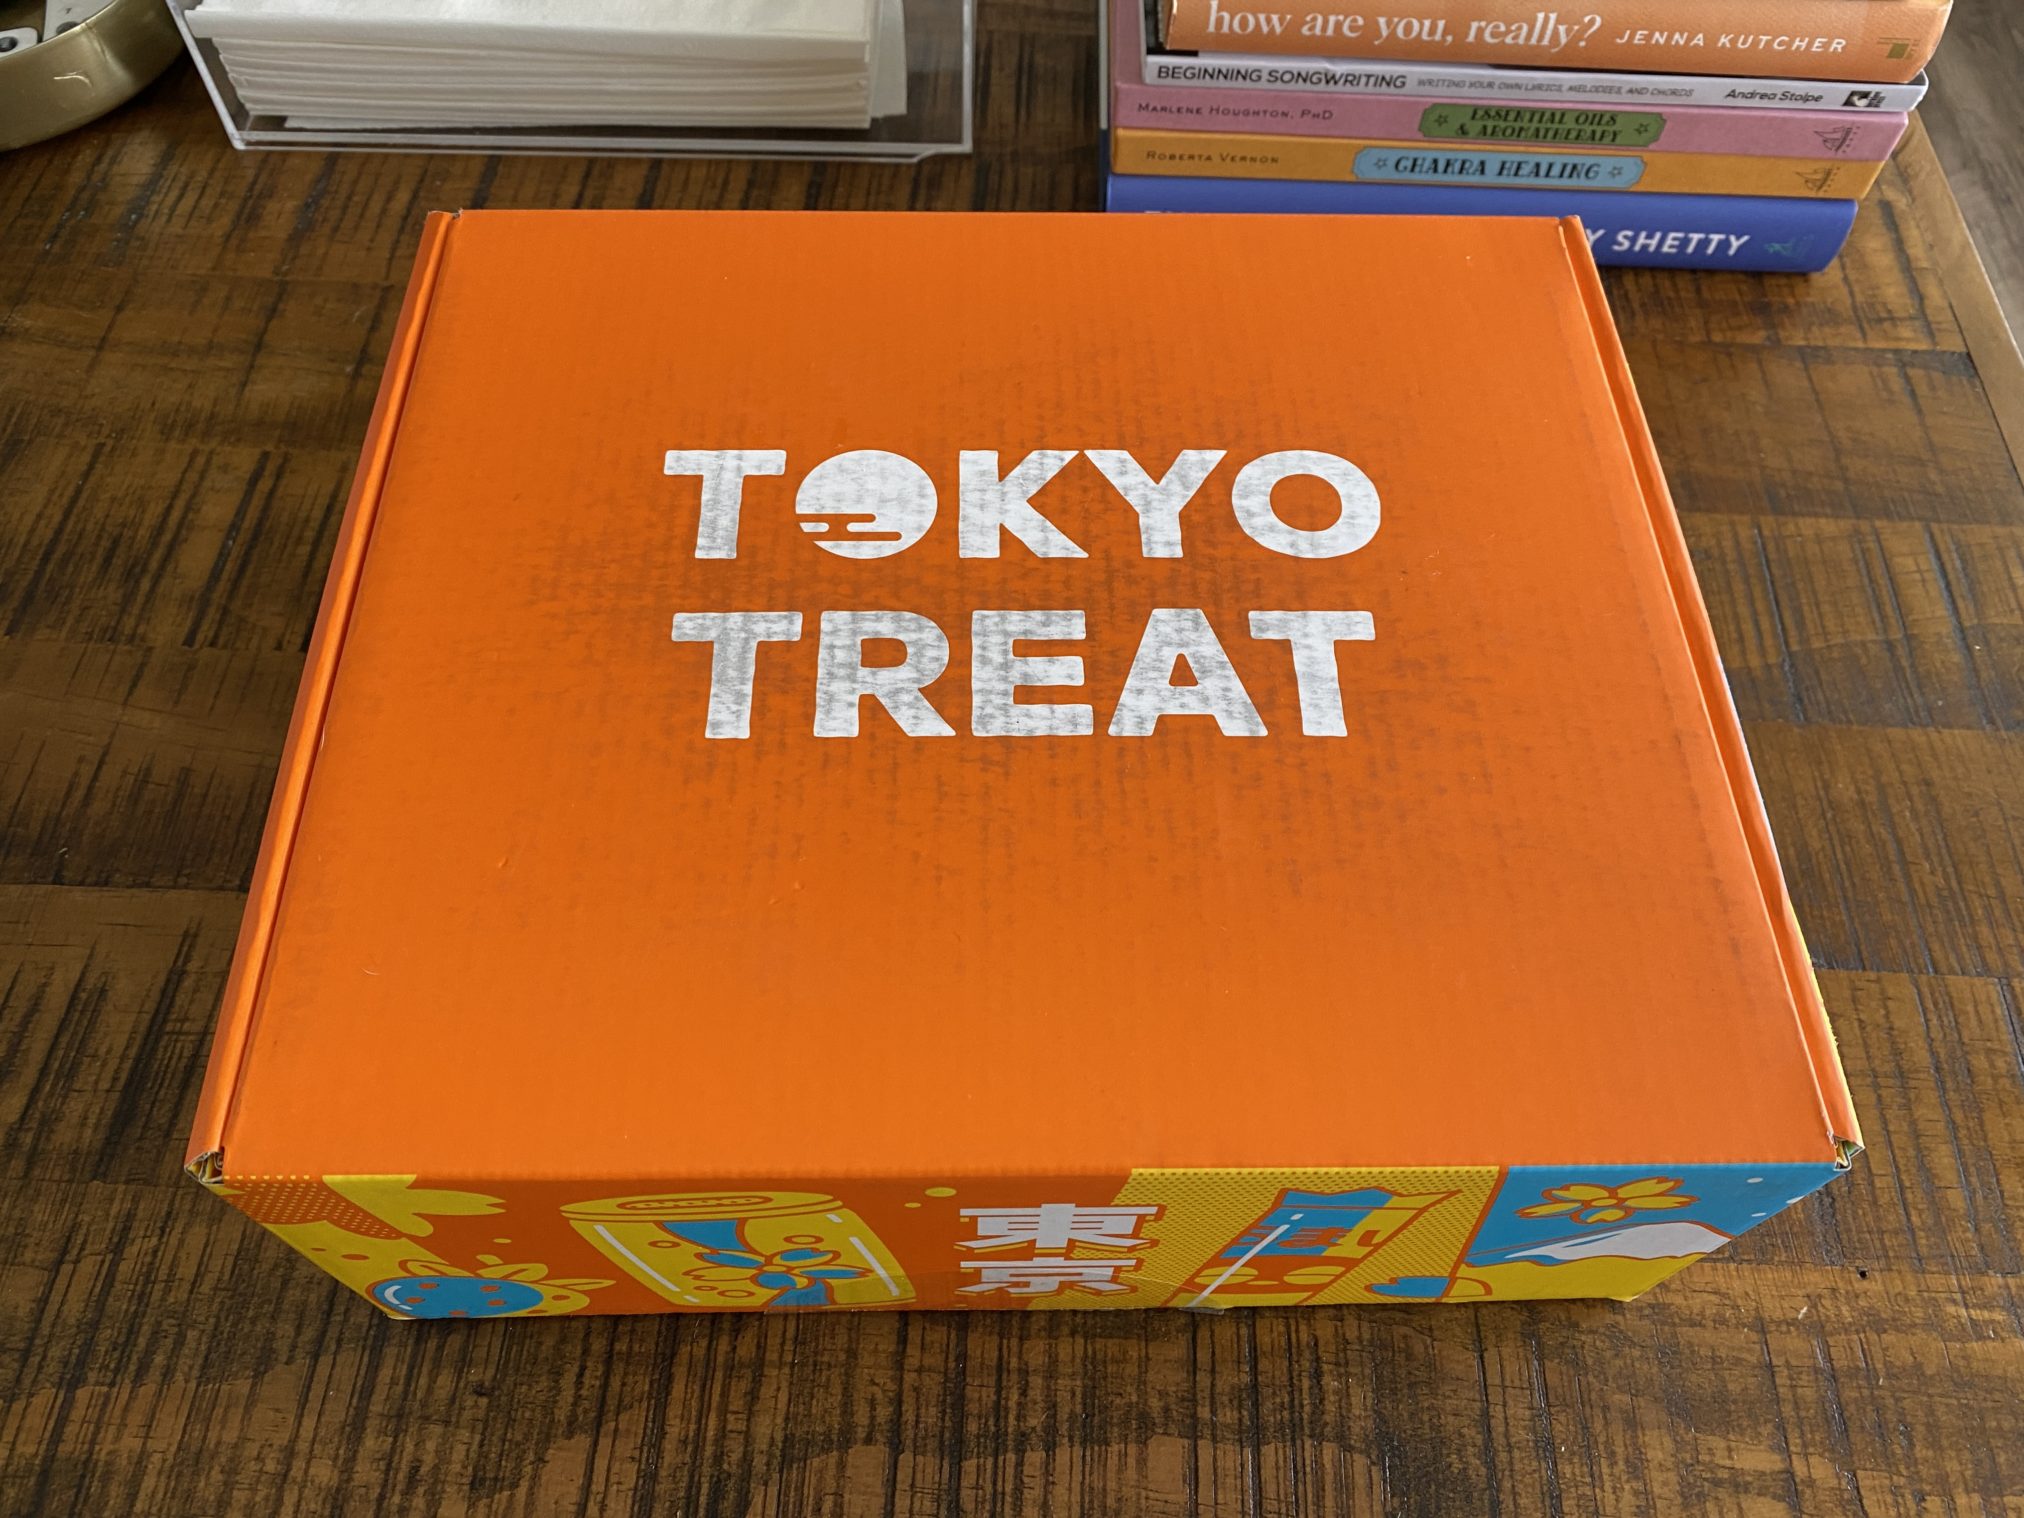 Tokyo Treat Subscription Box Review - Is It Worth The Money?